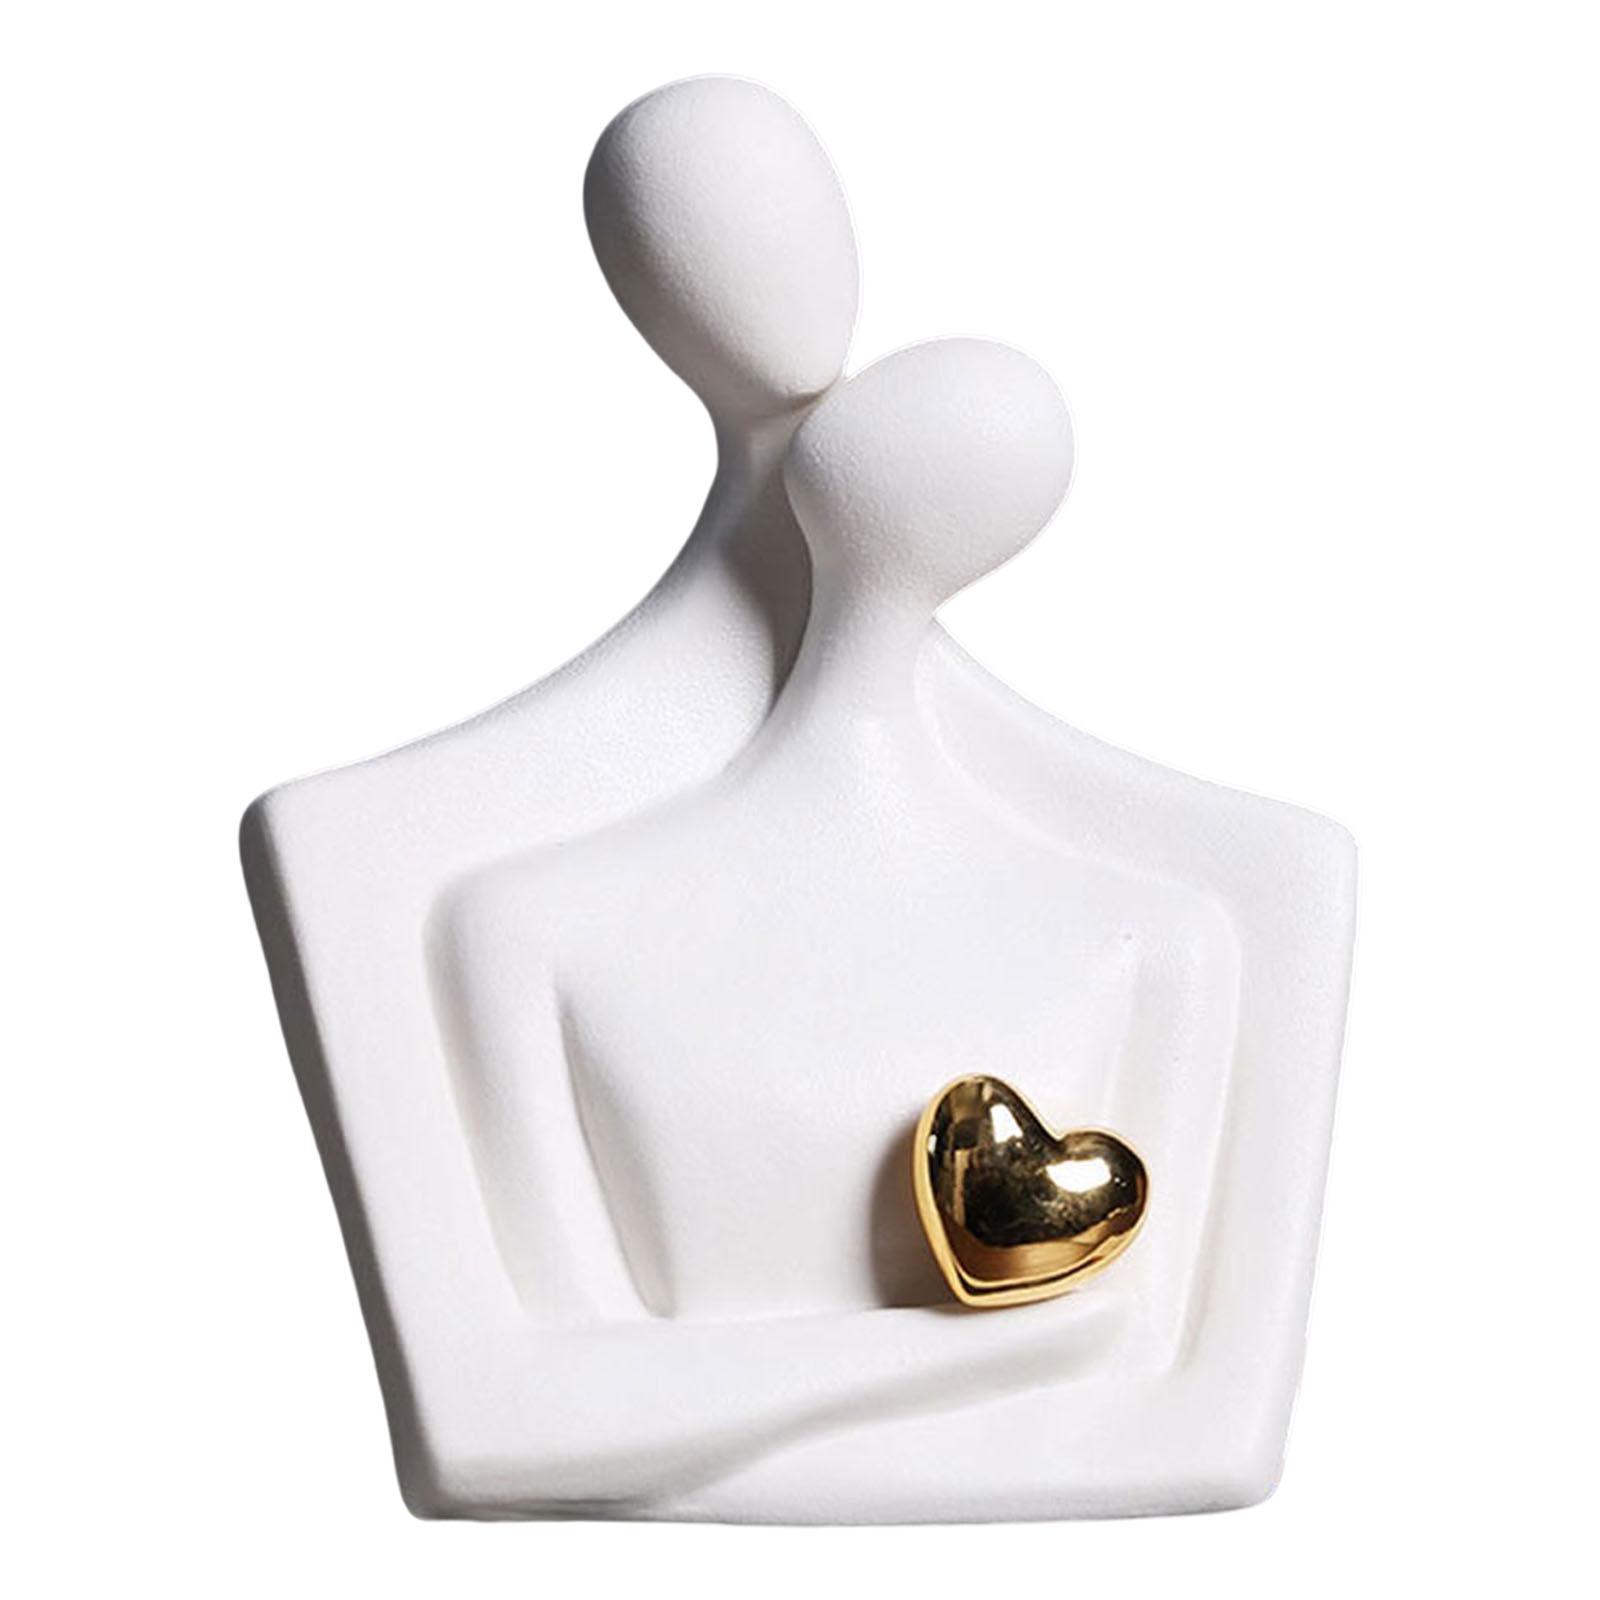 Abstract Lover Statue Nordic creative Crafts for Cabinet Desk Office Embrace White